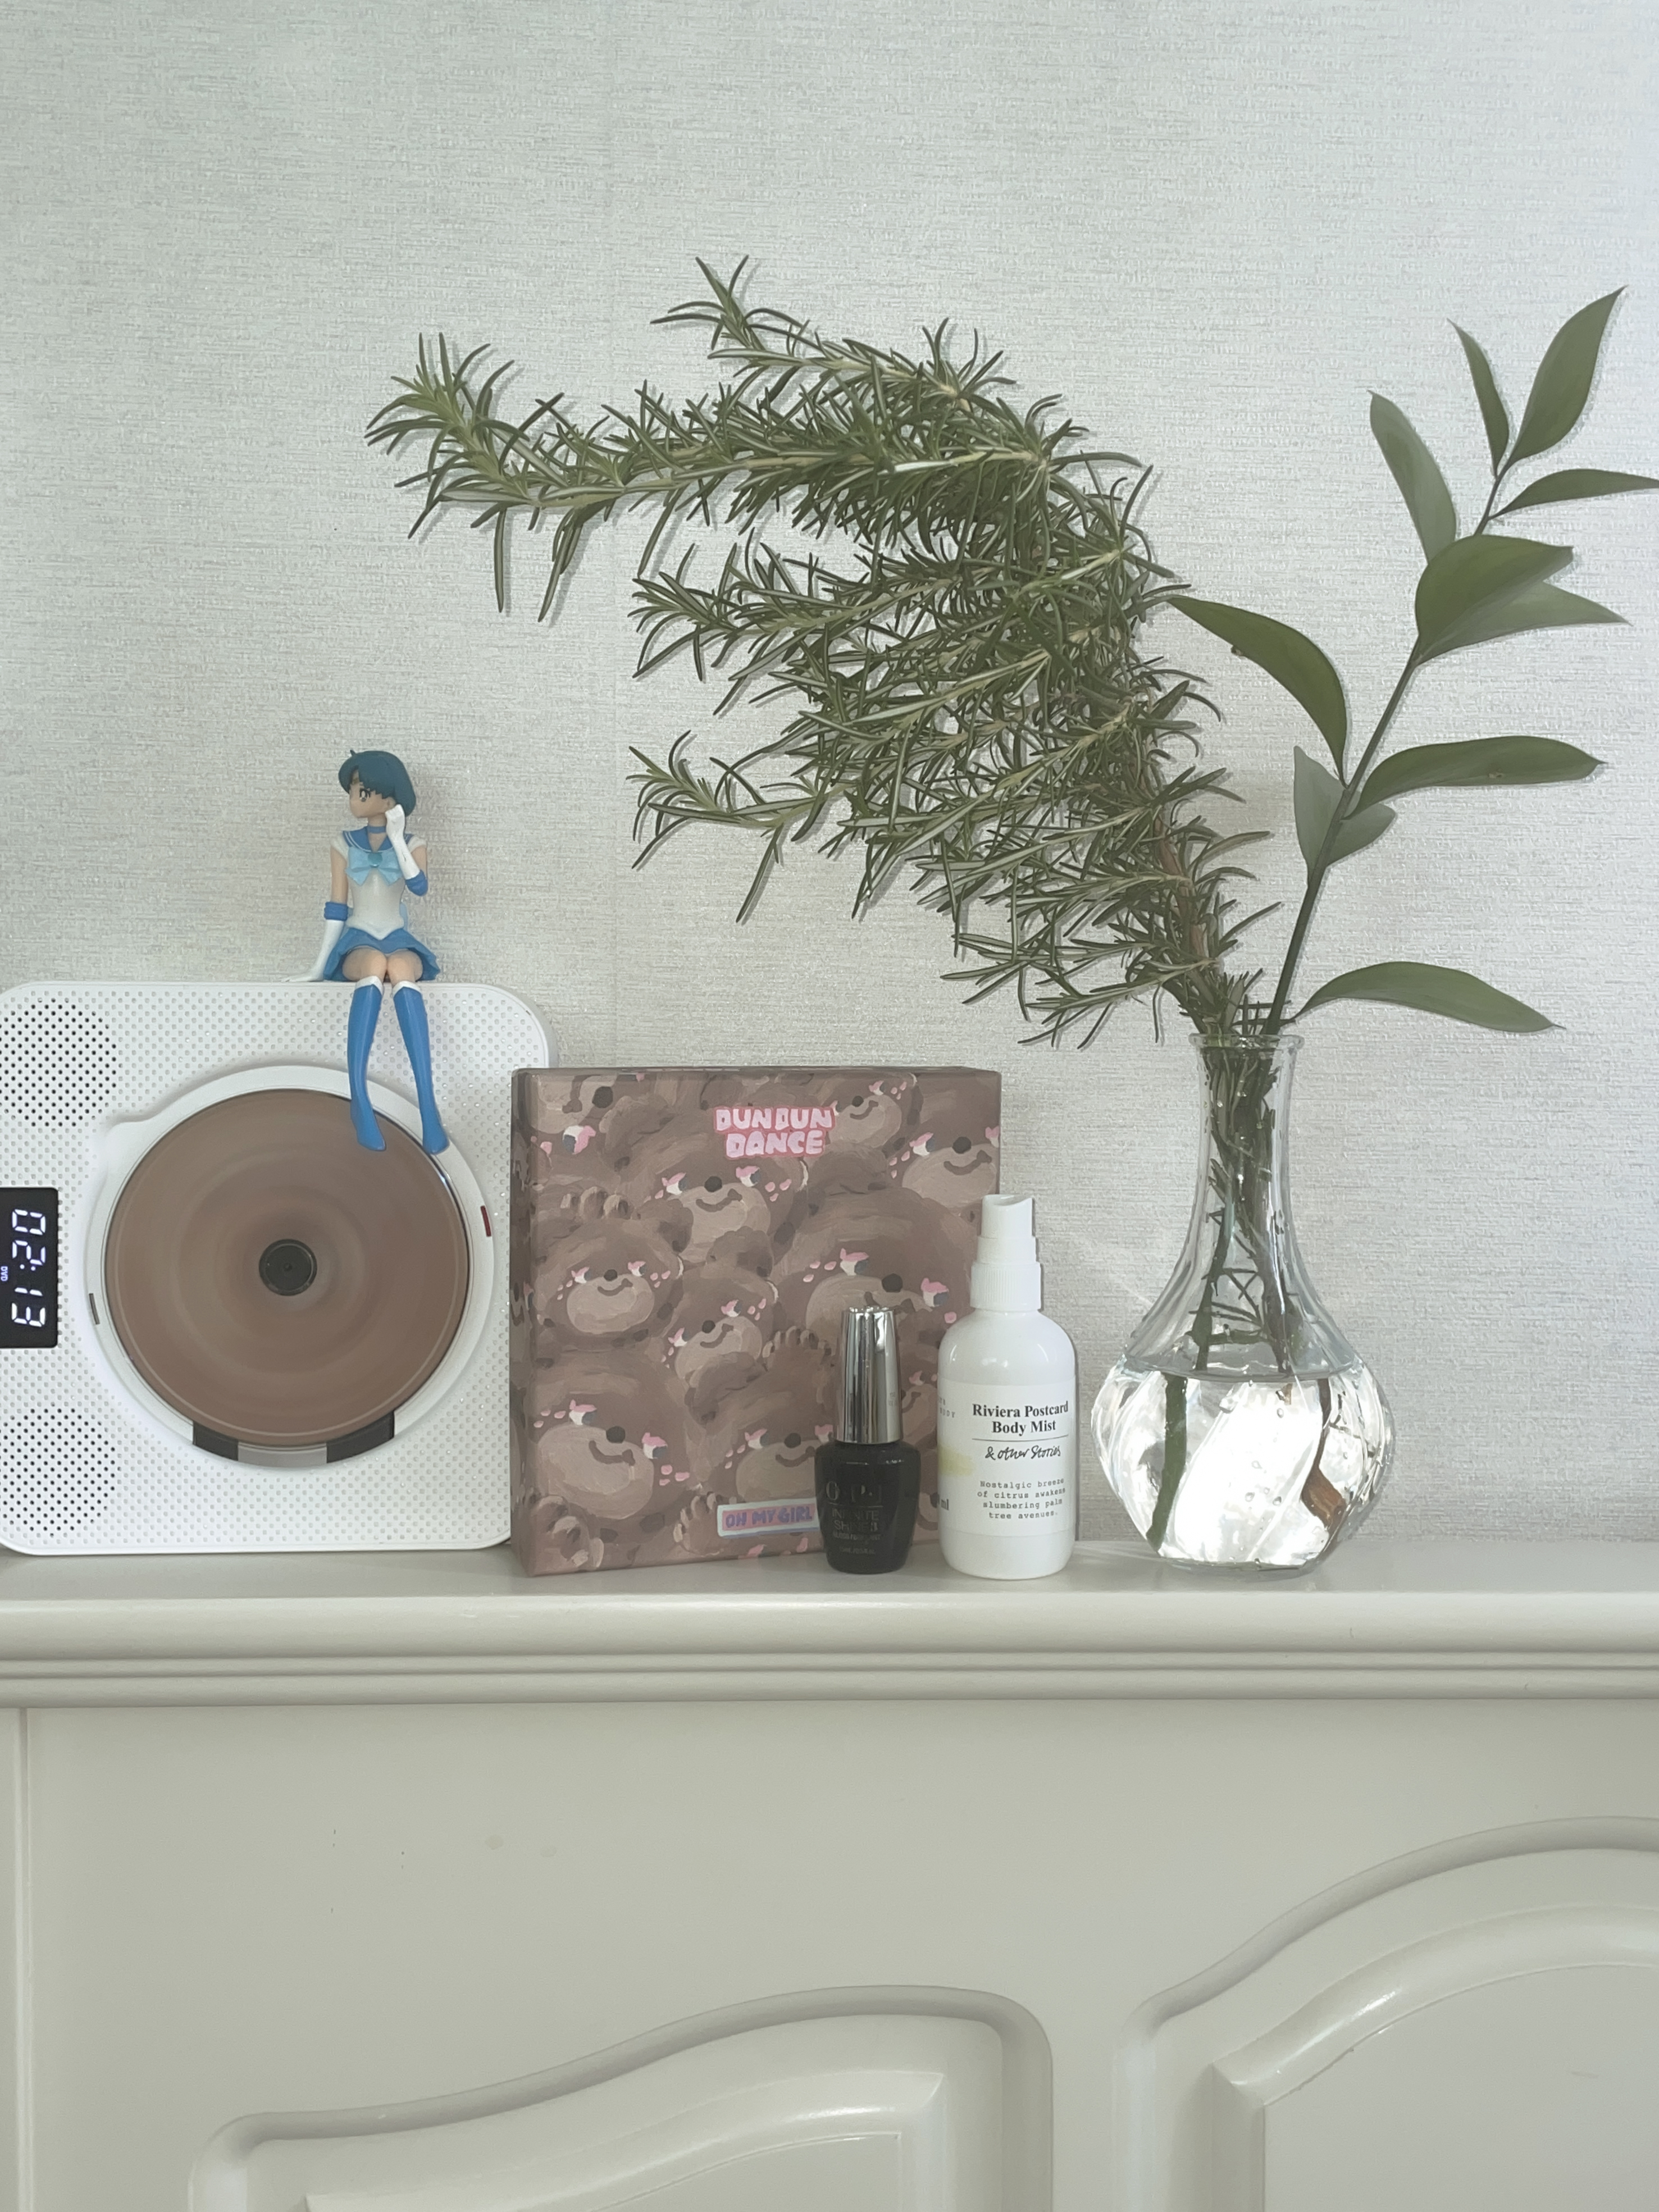 CD player next to the rosemary in a vase